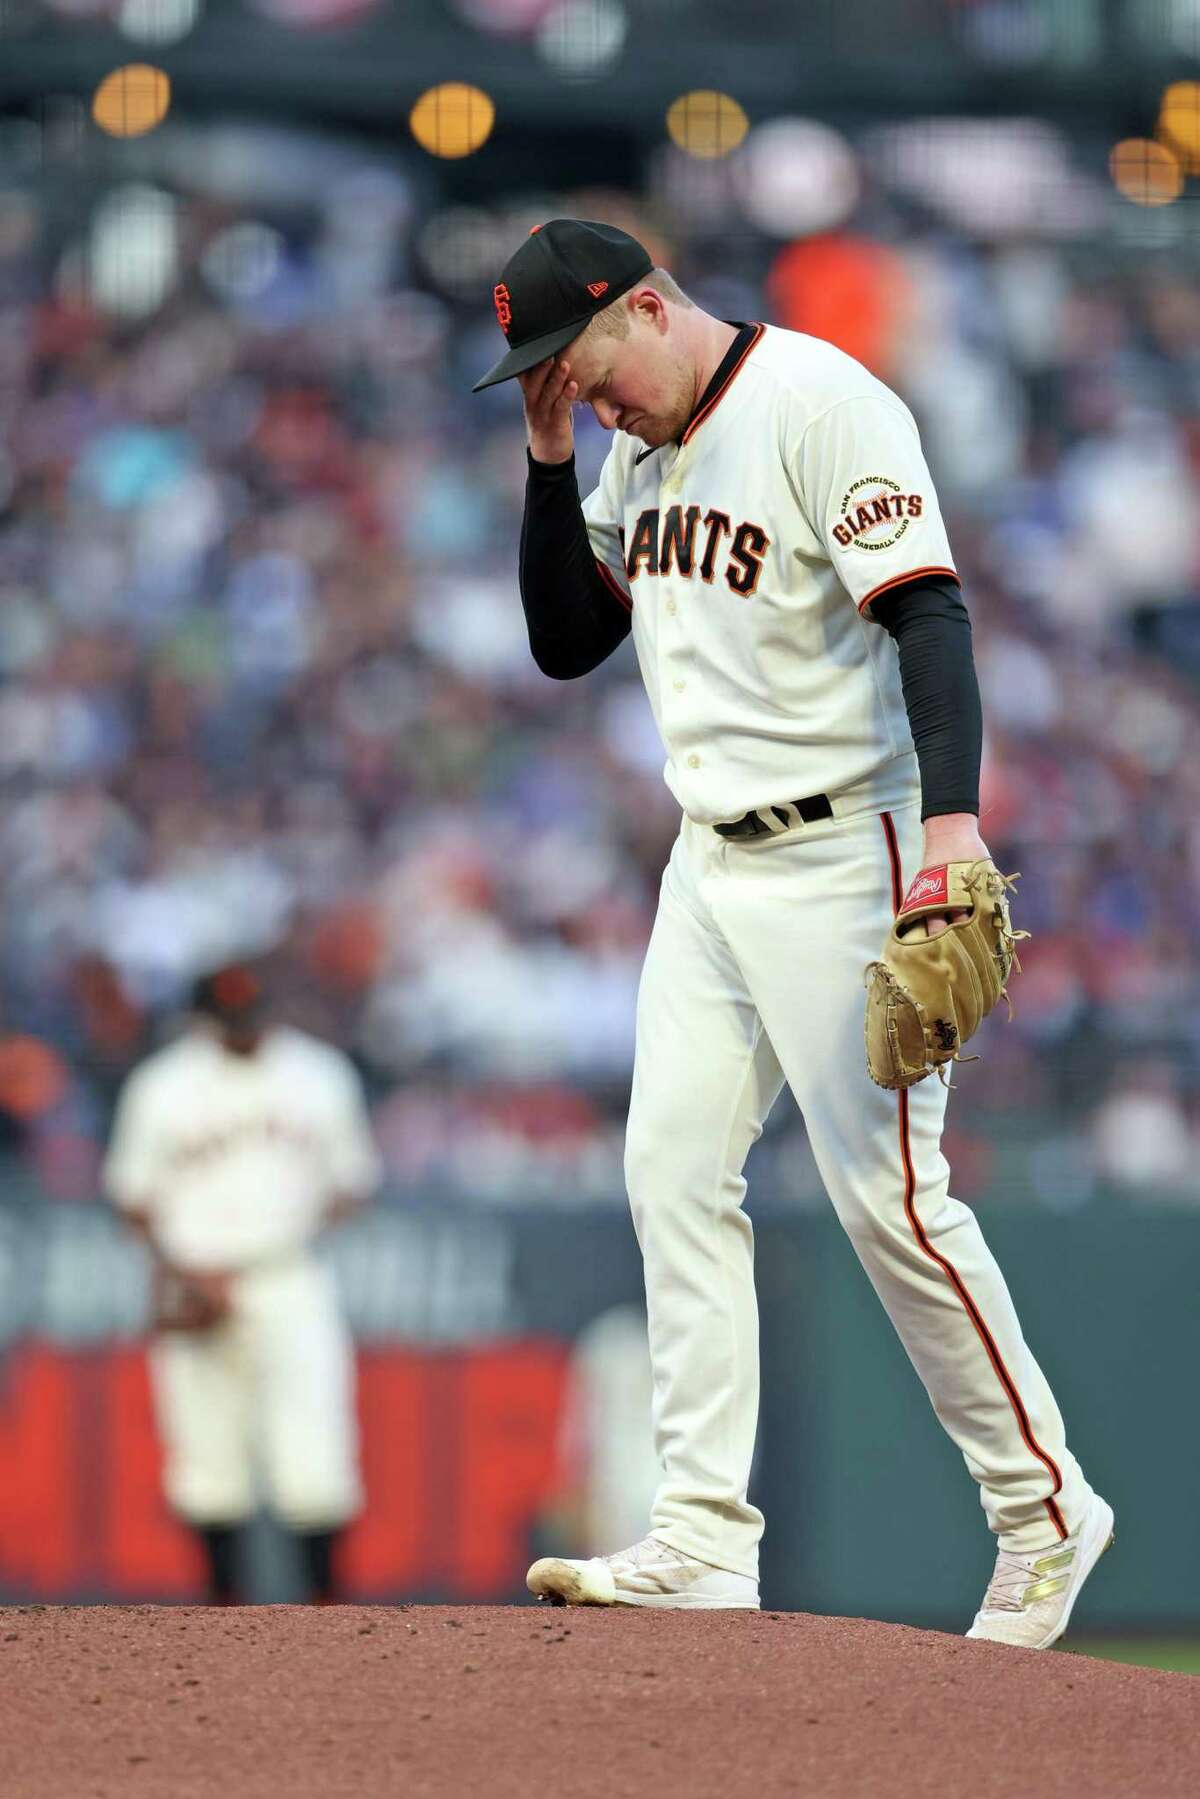 MLB final: Giants secure sweep of Dodgers behind solid Webb and